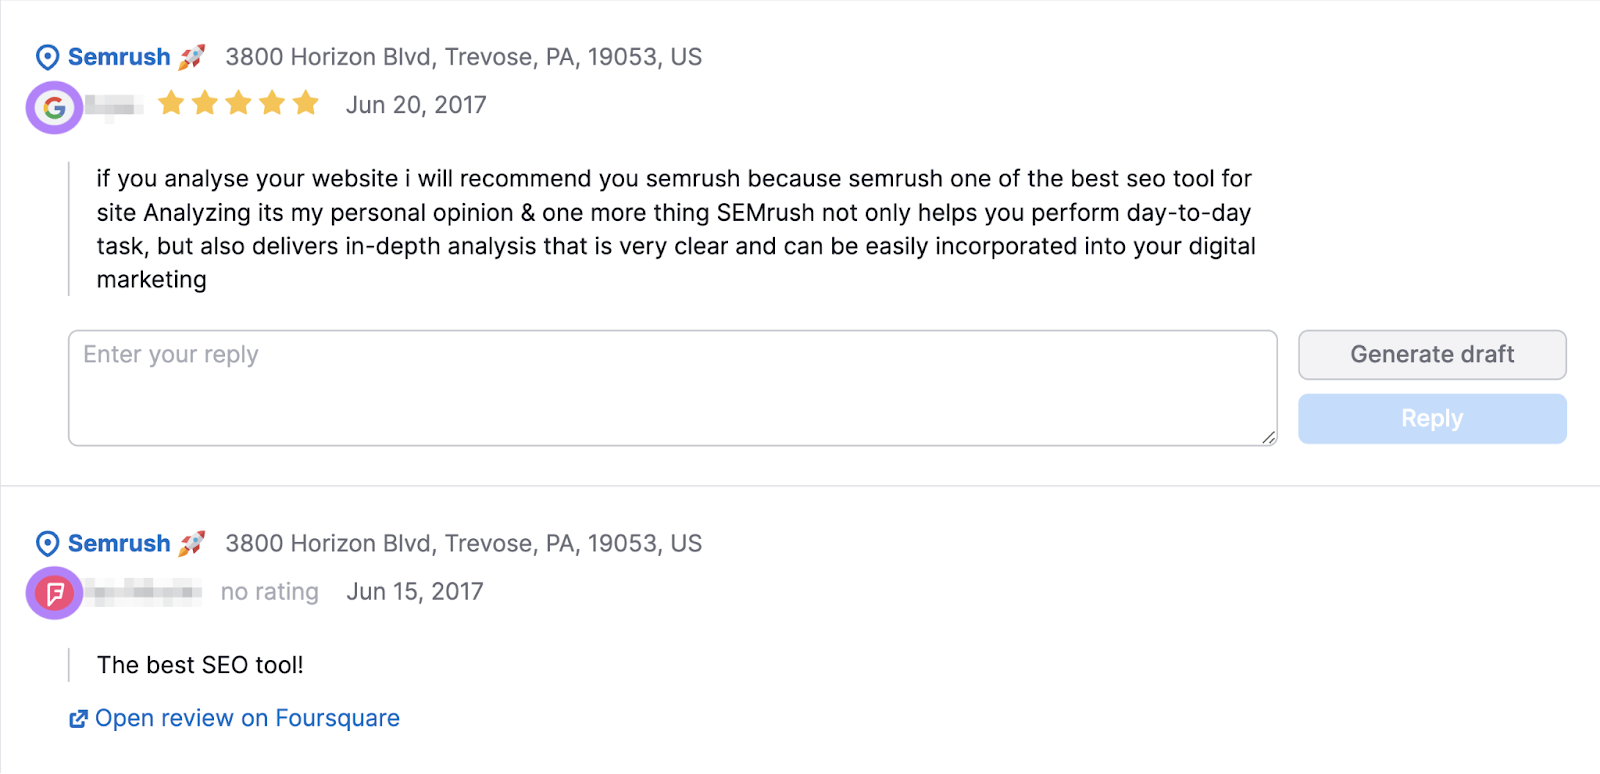 "Reviews" page in Review Management tool